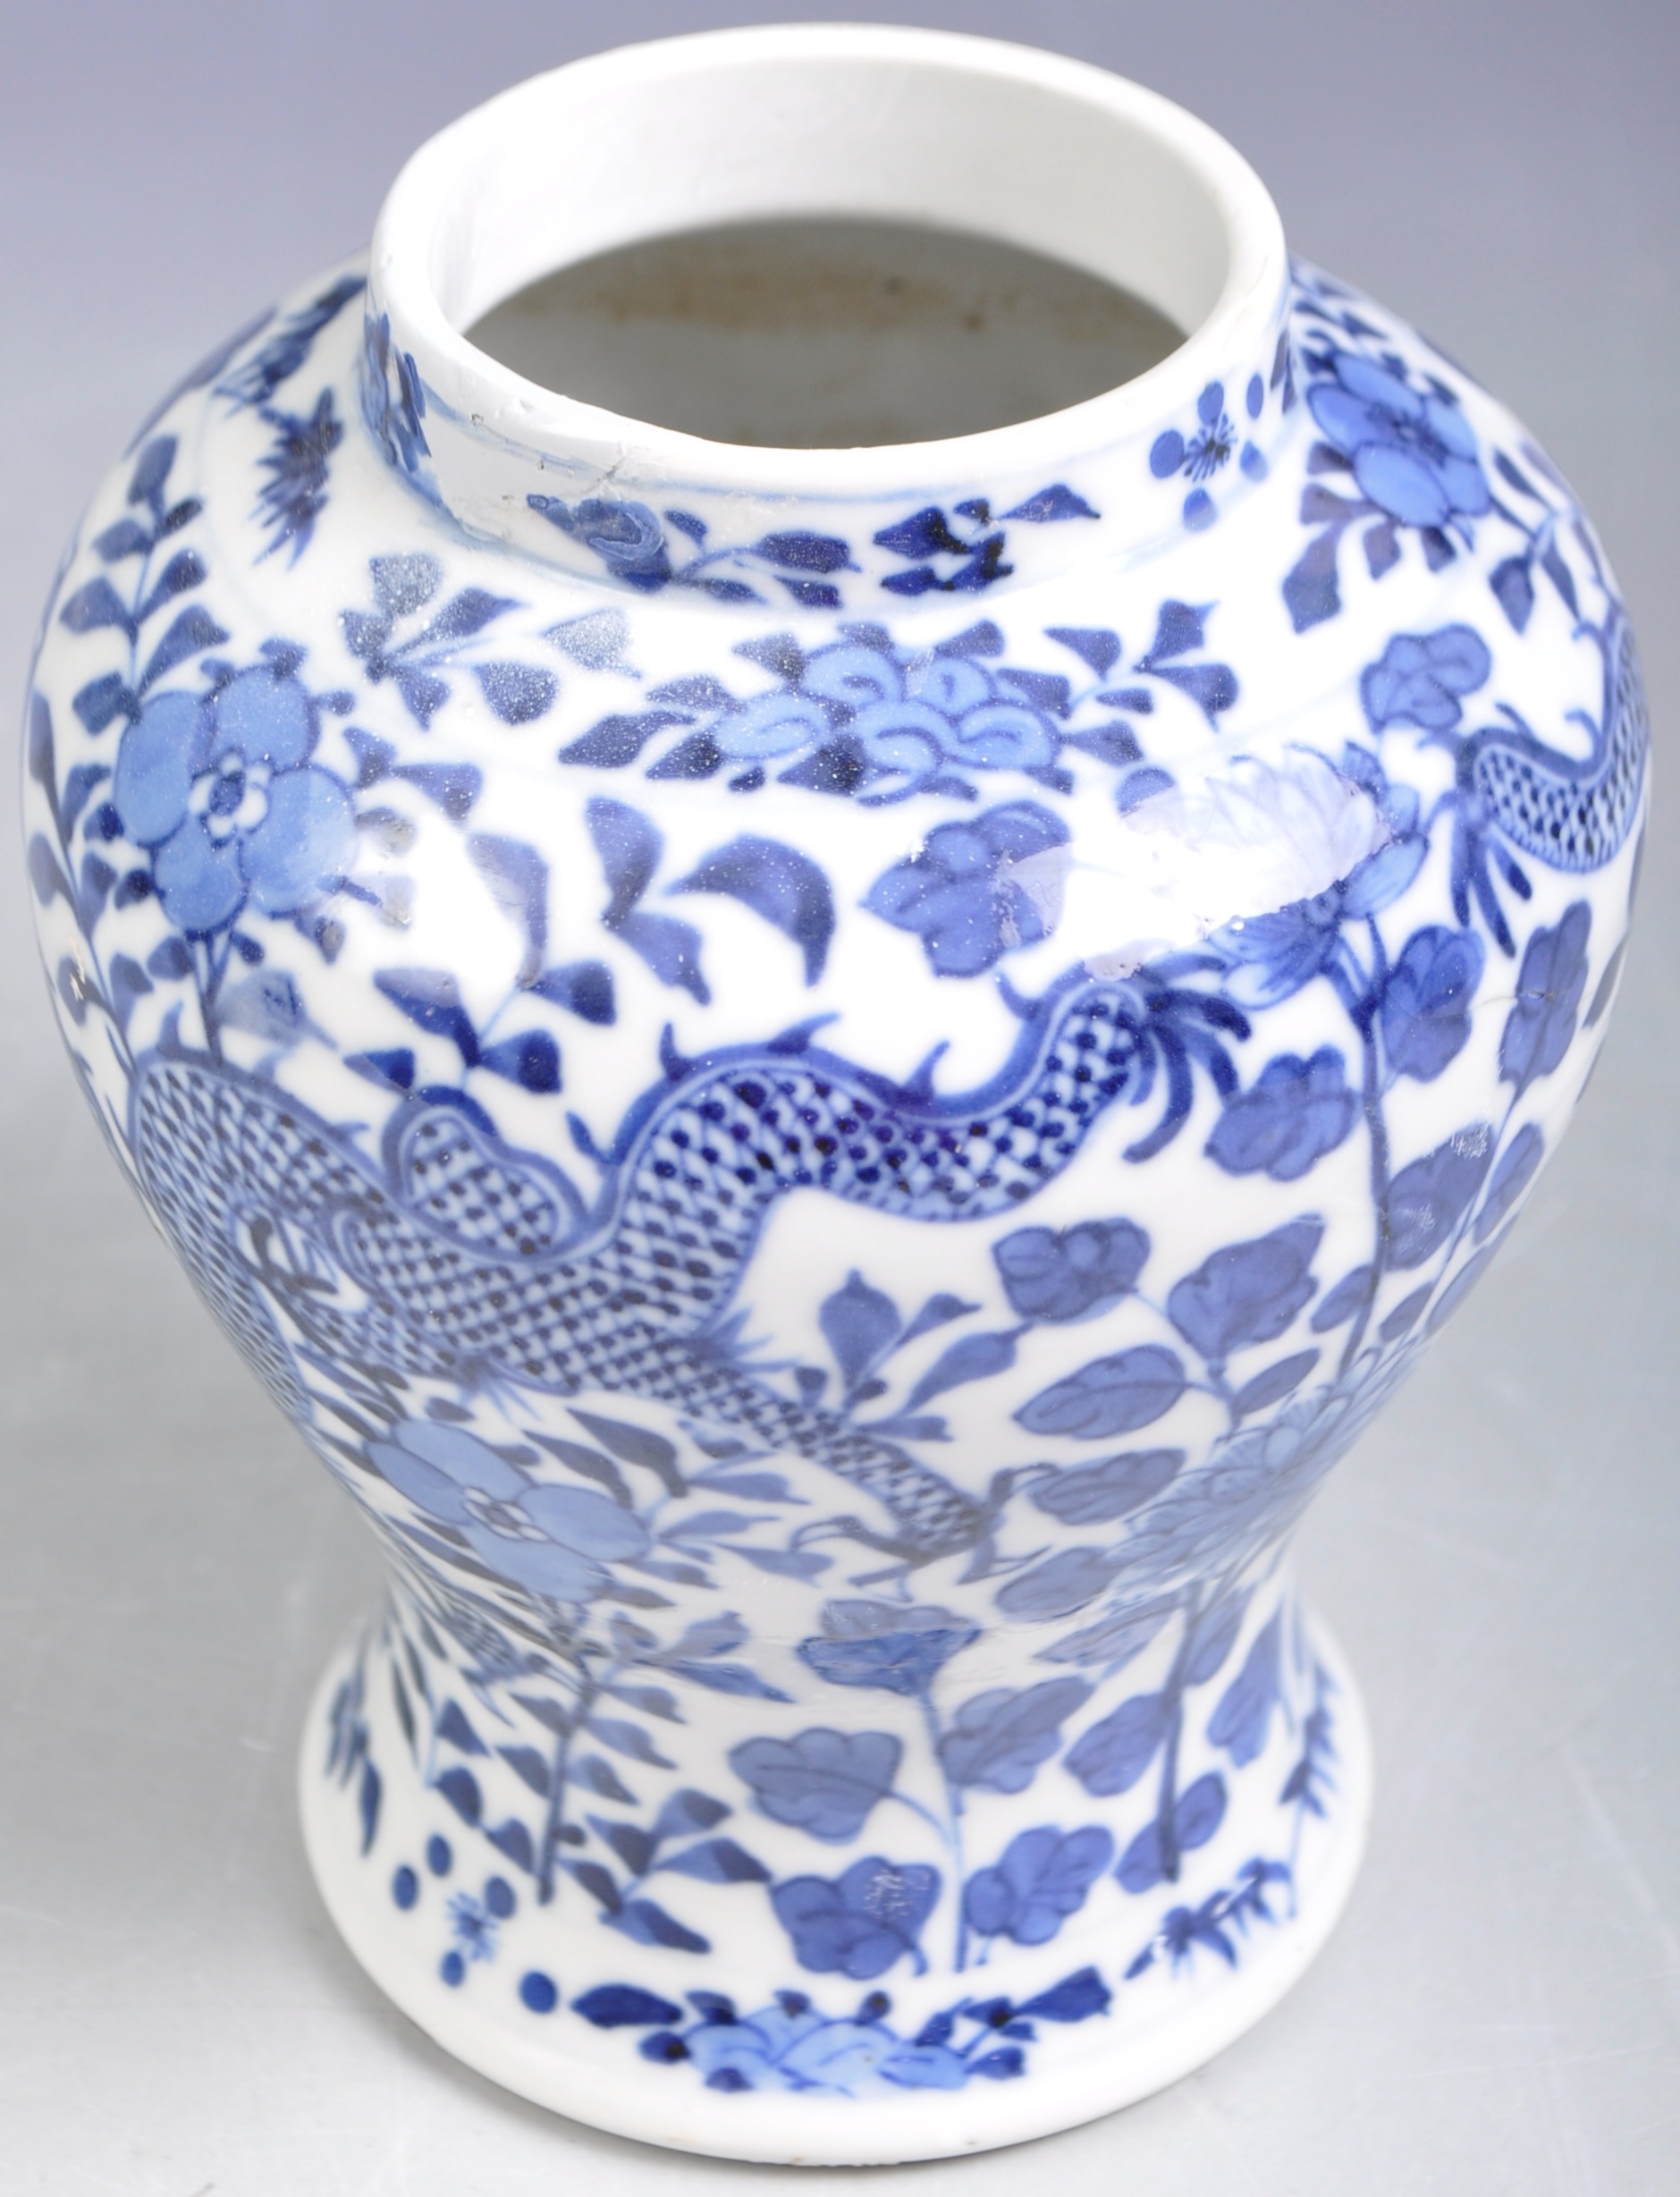 HSIEN FENG PERIOD CHINESE BALUSTER VASE WITH DRAGONS - Image 6 of 6